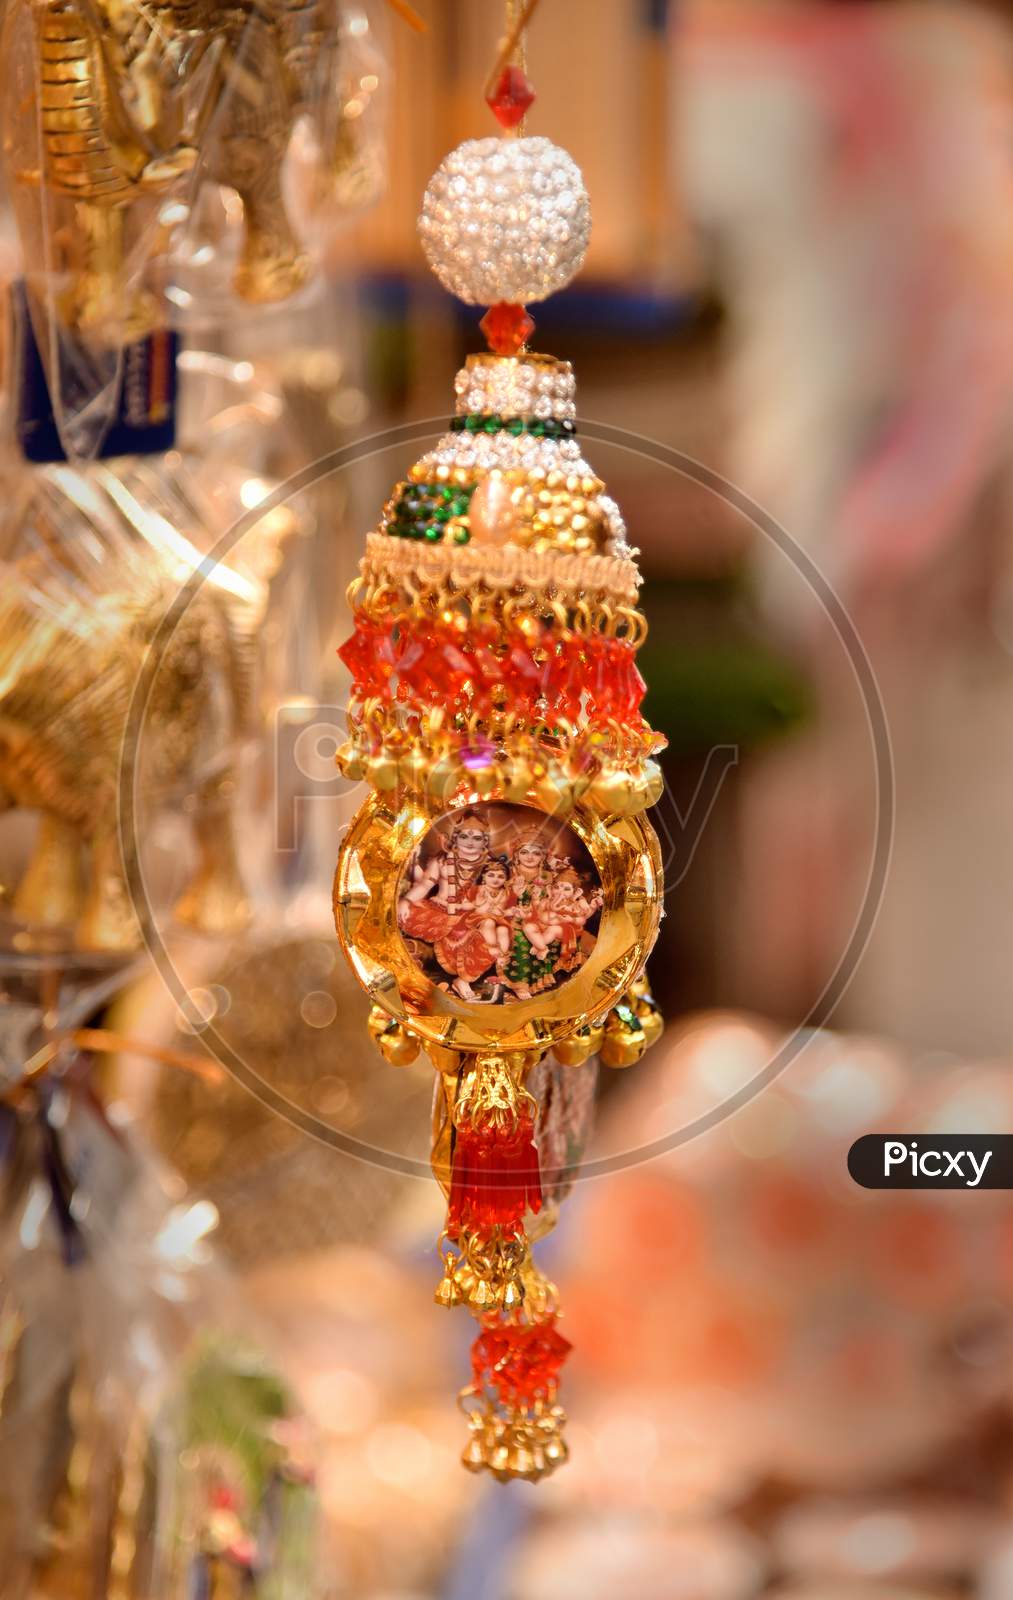 Ornament With Ear Rings Selling At a Vendor Stall